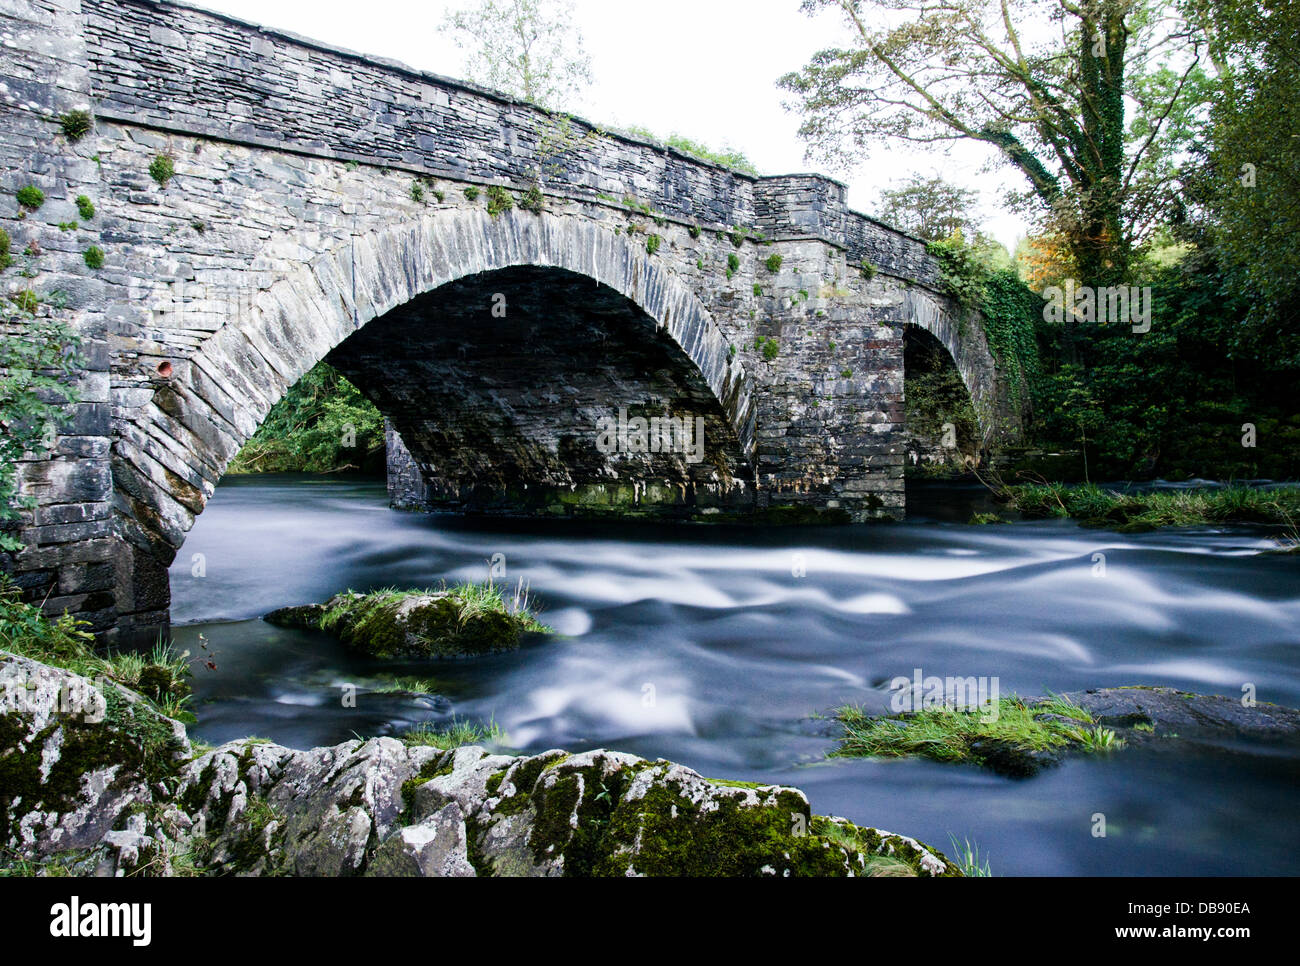 A long exposure shot of a stone bridge, with smooth river water running under and few rocks in the foreground. Skelwith bridge. Stock Photo